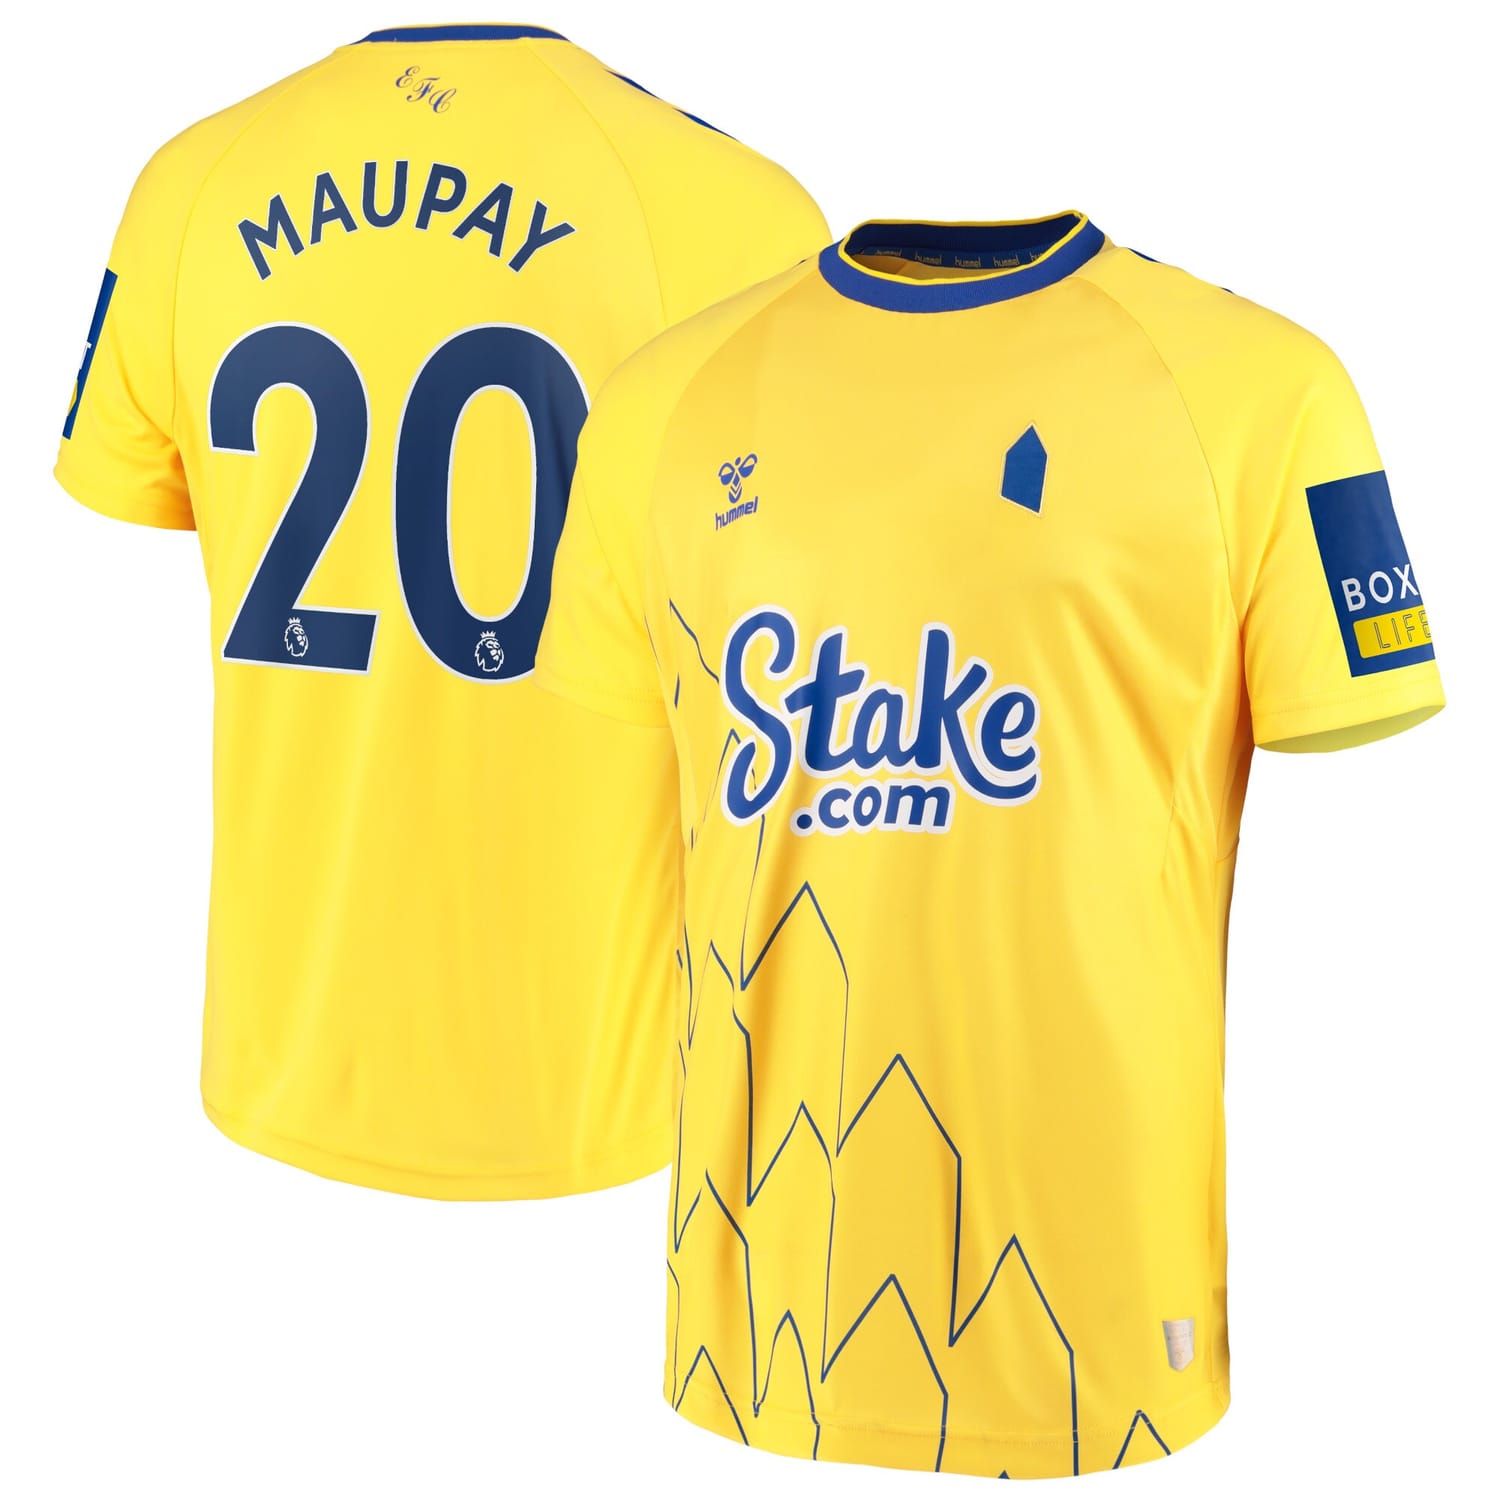 Premier League Everton Third Jersey Shirt 2022-23 player Neal Maupay 20 printing for Men